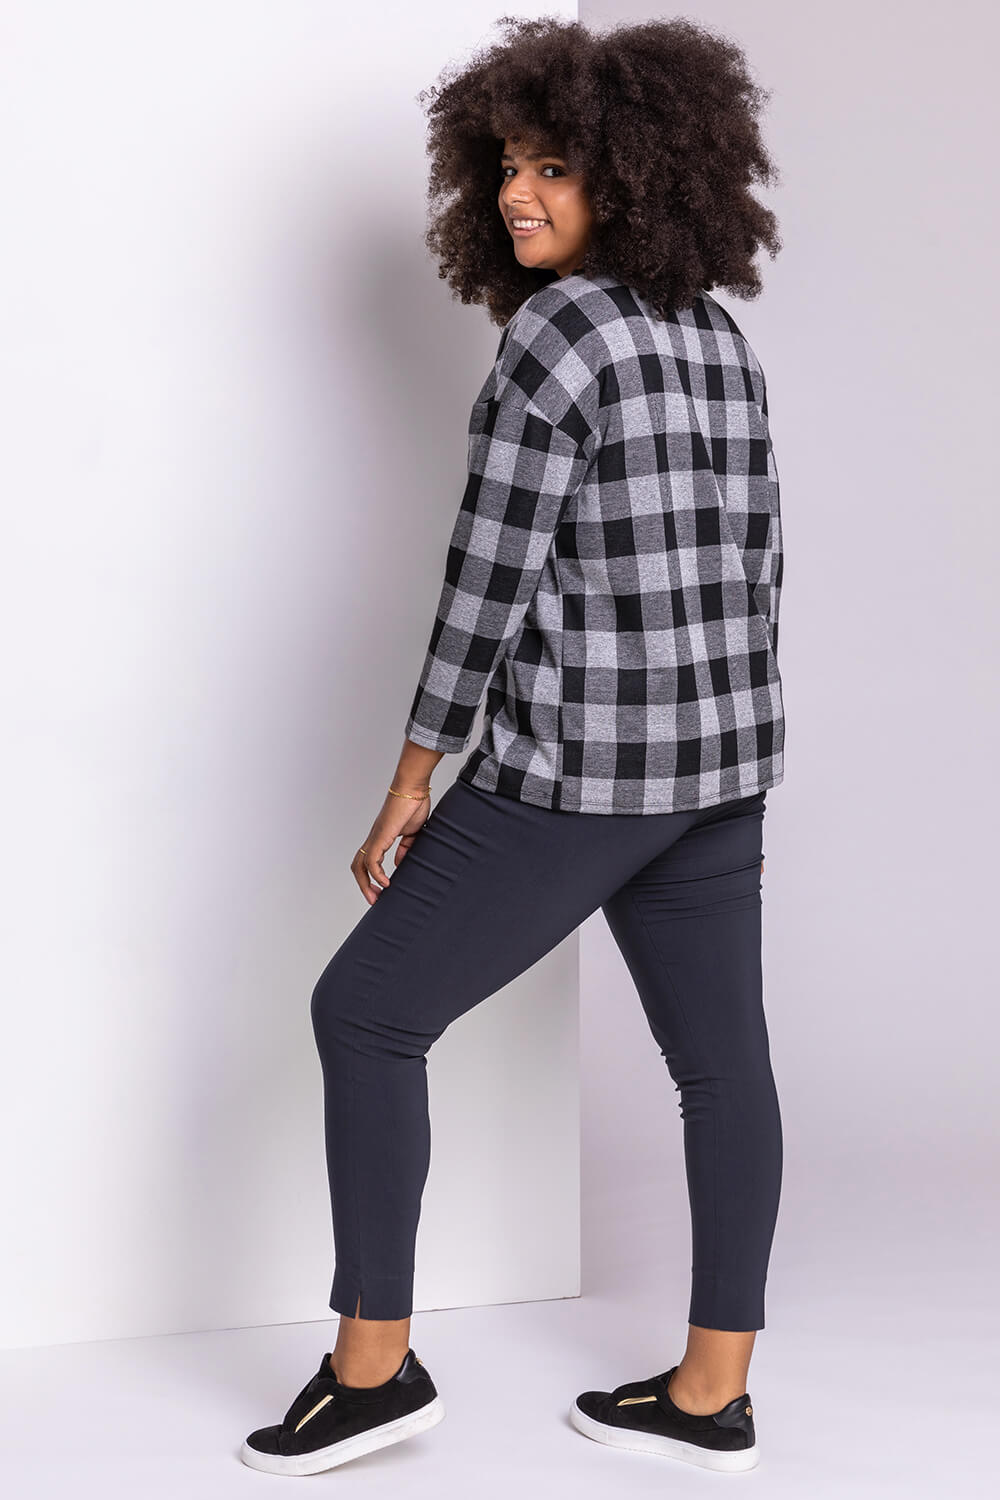 Grey Curve Check Print Long Sleeve Top, Image 2 of 5